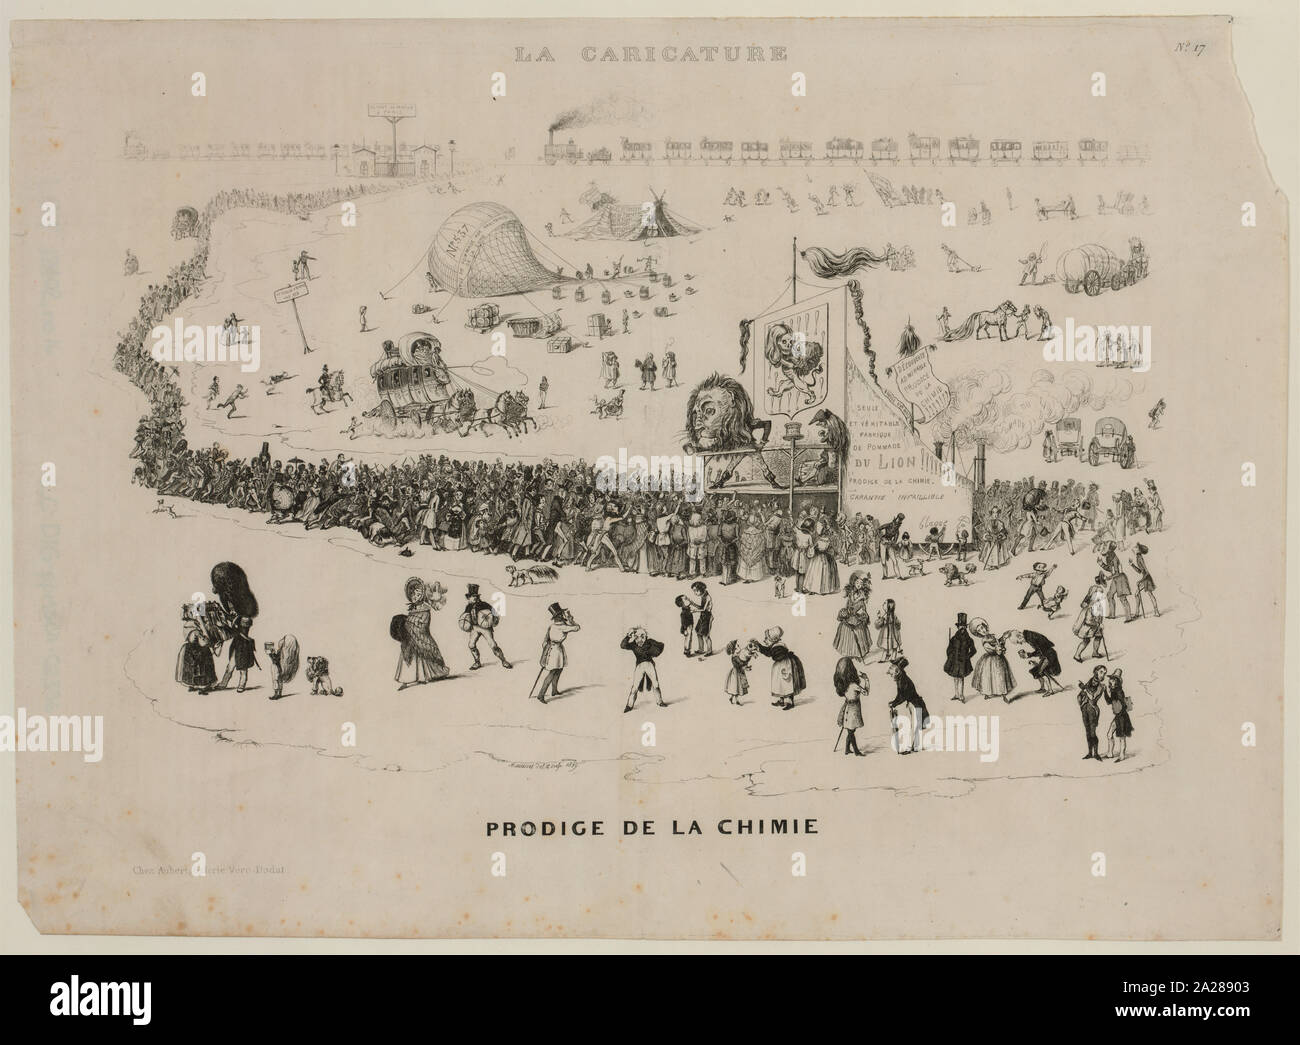 Prodige de la chimie; French cartoon shows a long line of people, with more arriving by stagecoach and railroad, at a medicine show where a quack with a lion's head, the Prodige de la chimie, is marketing his hair tonic De pommade du lion. In the center, a balloon Envoi de pommade aux habitants de la lune is being inflated.; Stock Photo